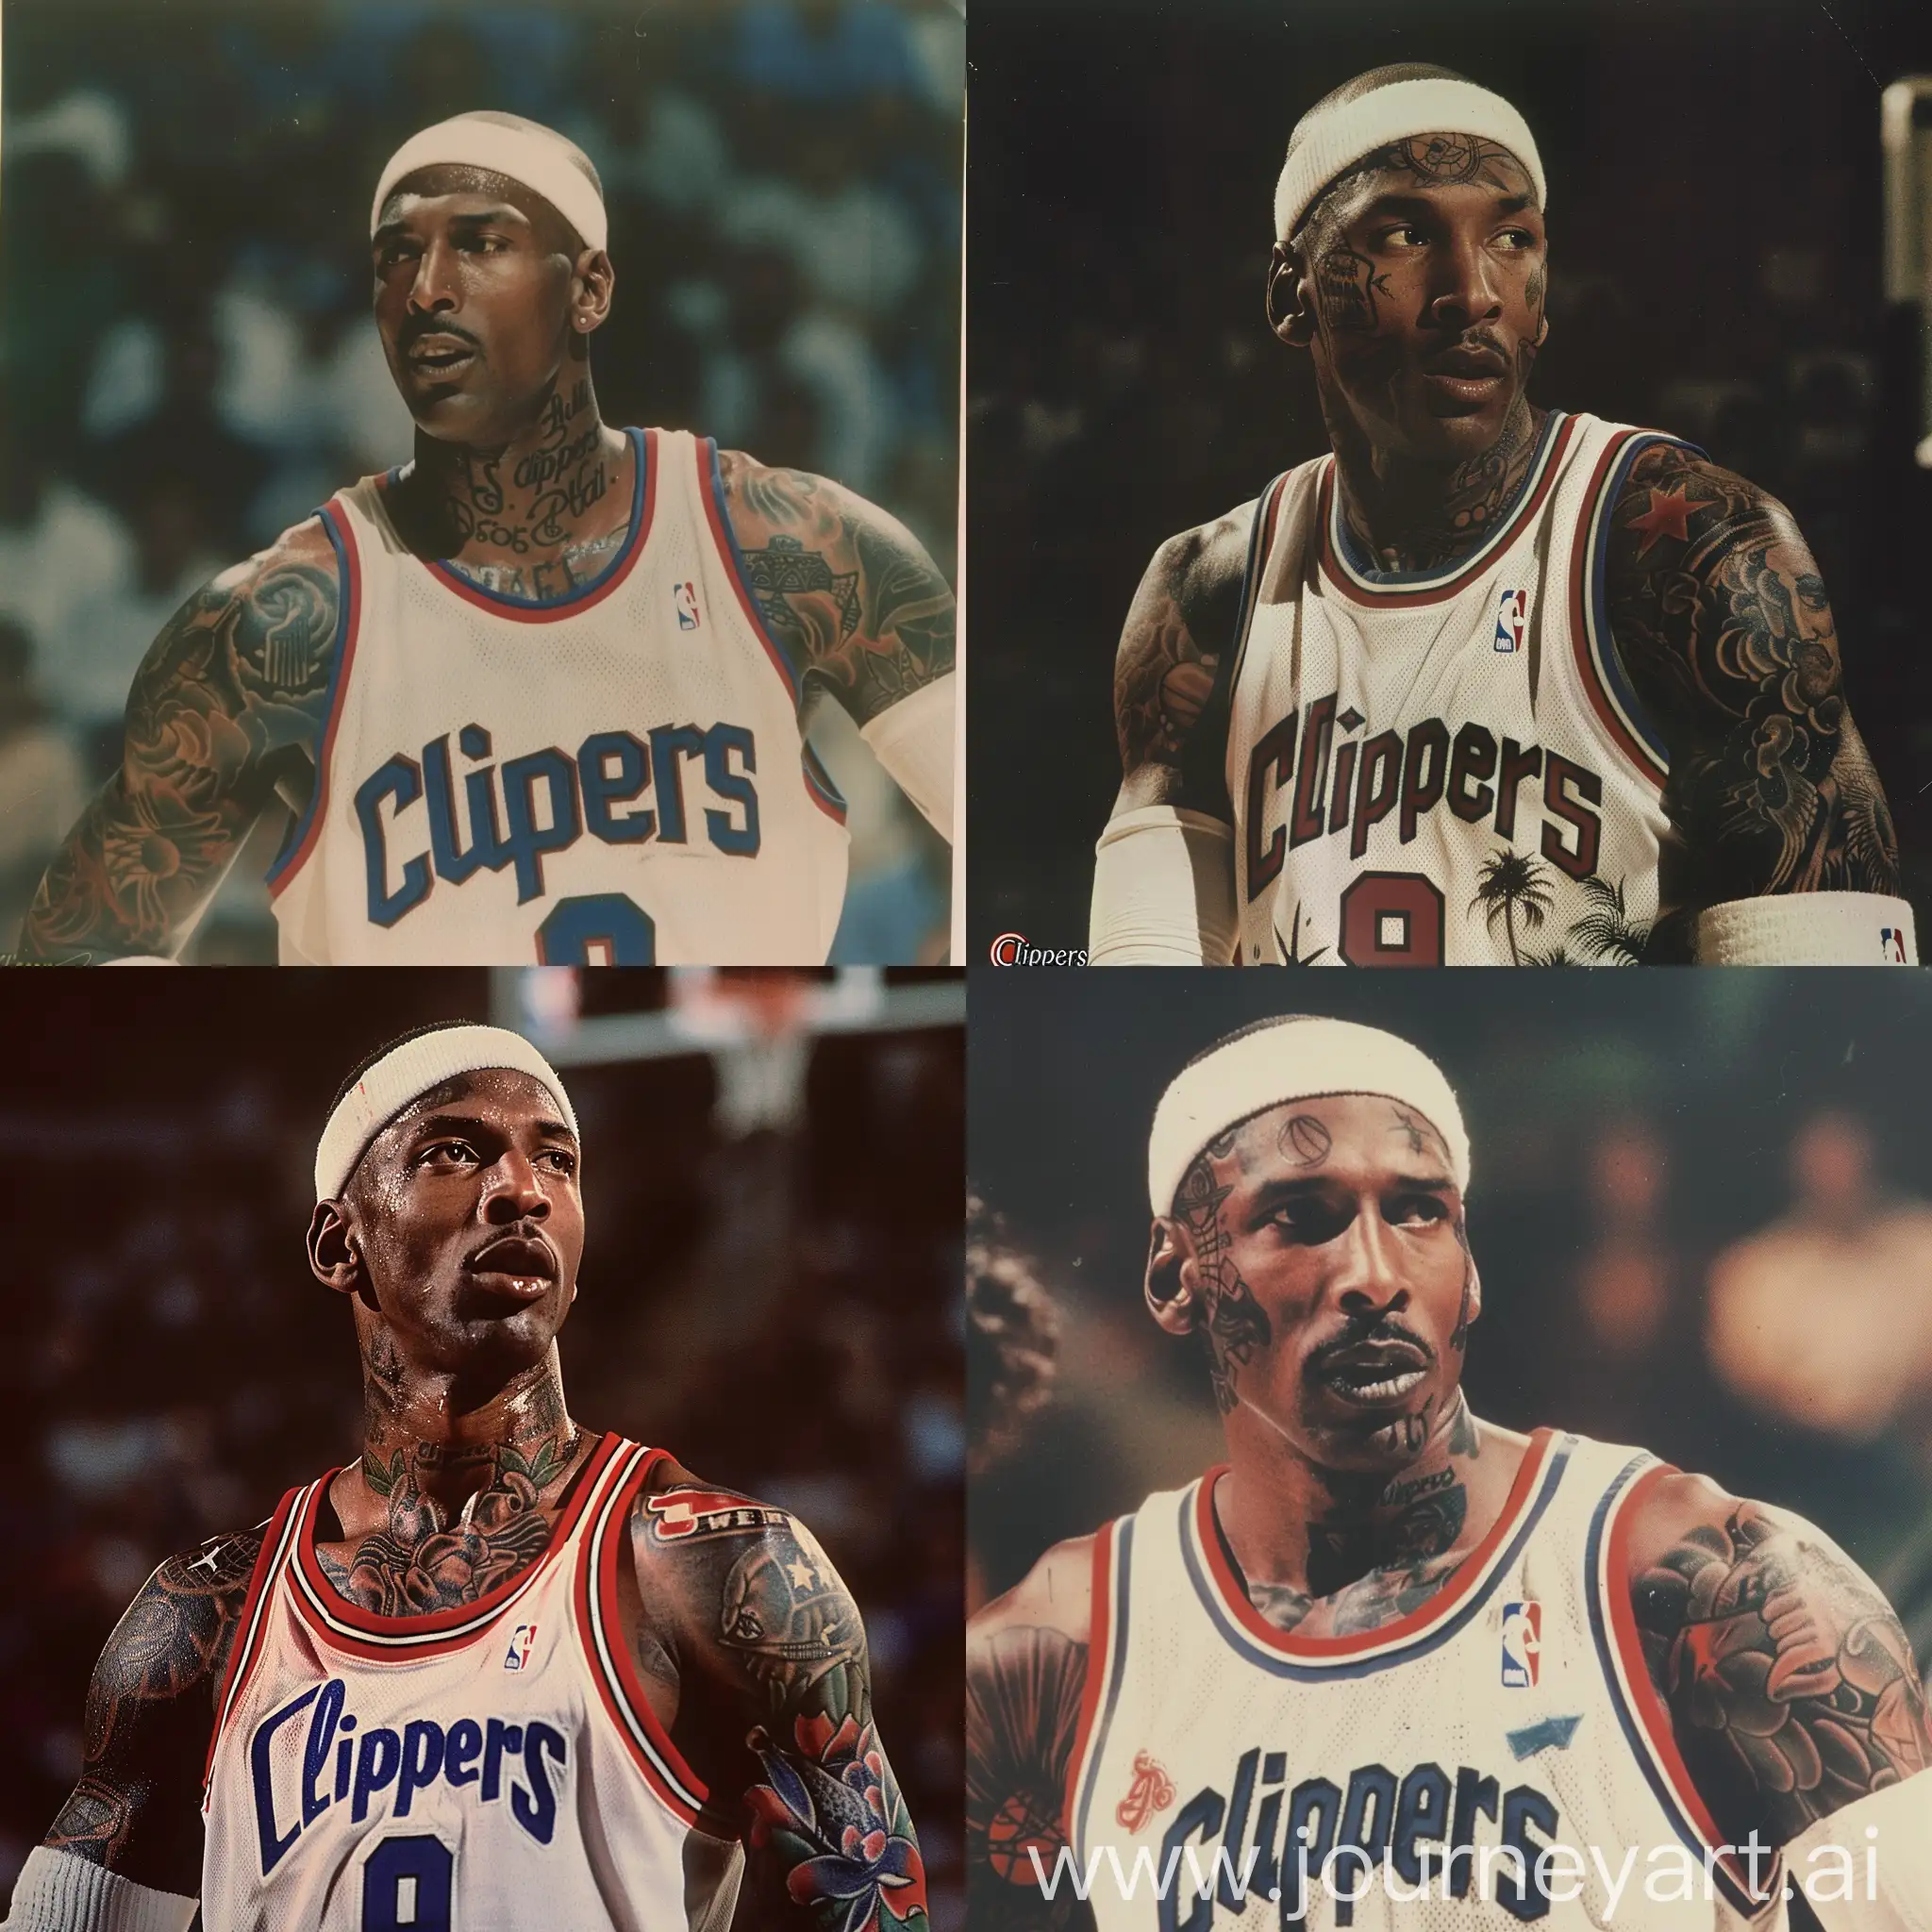 1980s-Michael-Jordan-Interview-with-Tattoos-and-Clippers-Jersey